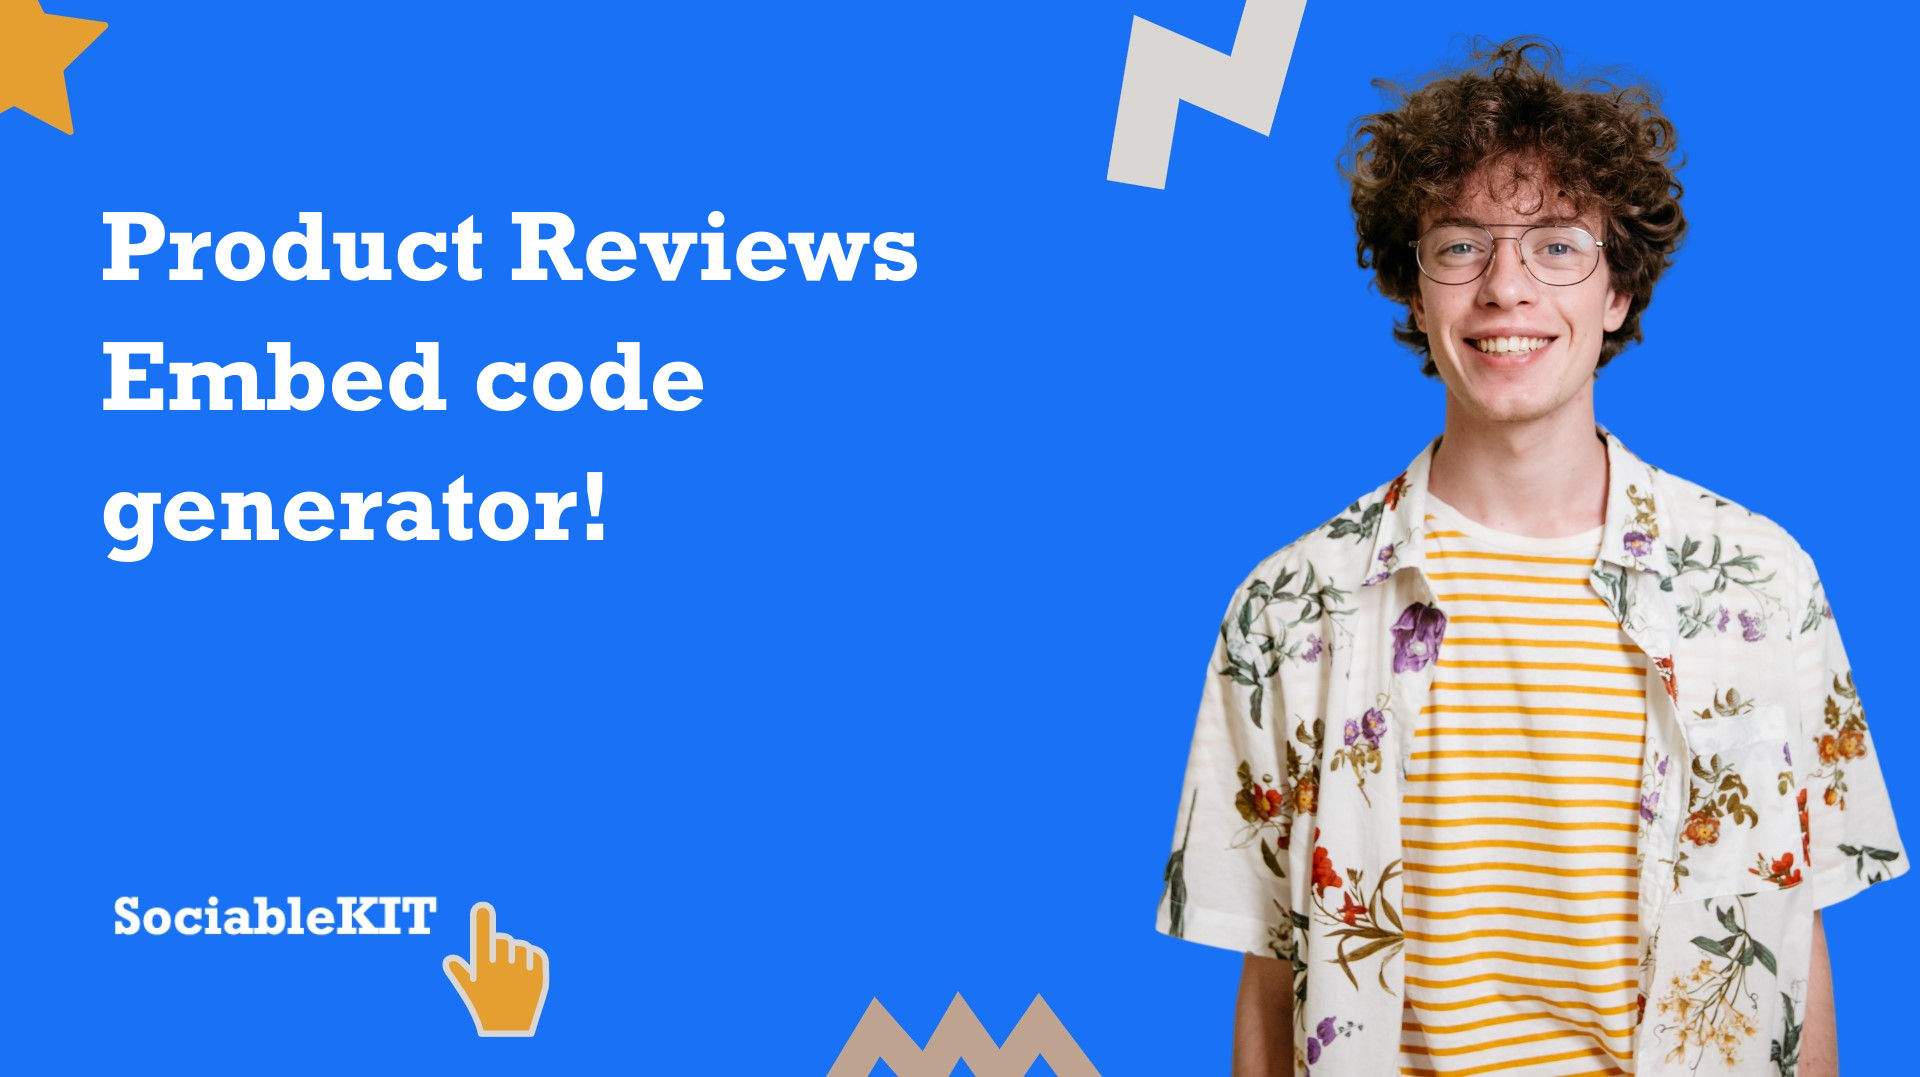 Product Reviews embed code generator